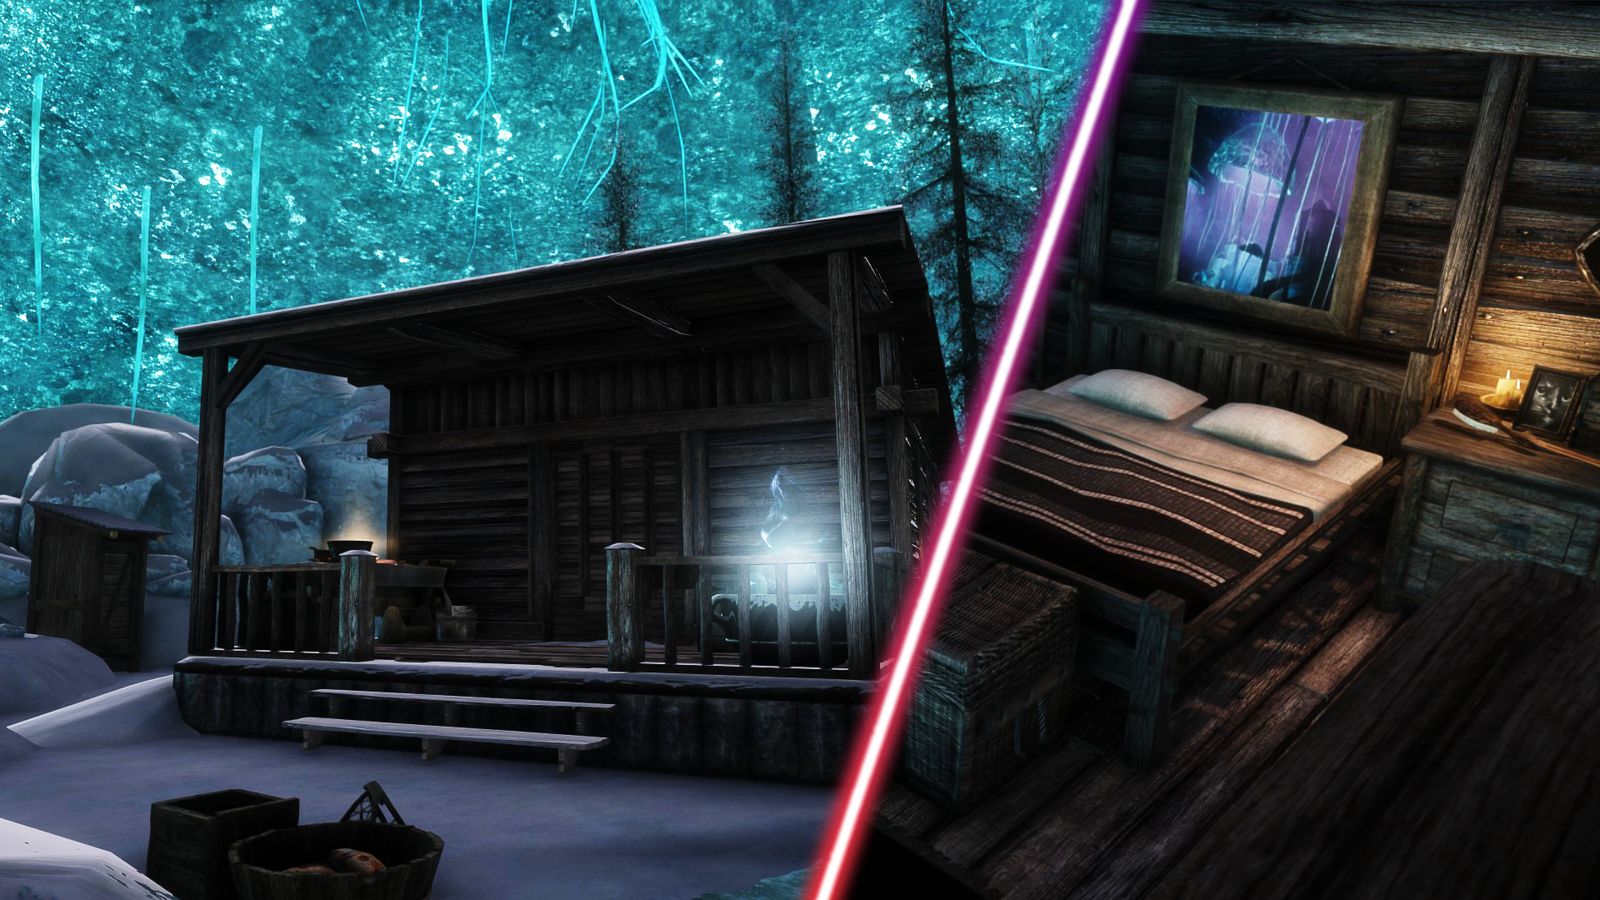 A cottagecore-style magical cabin in Skyrim.